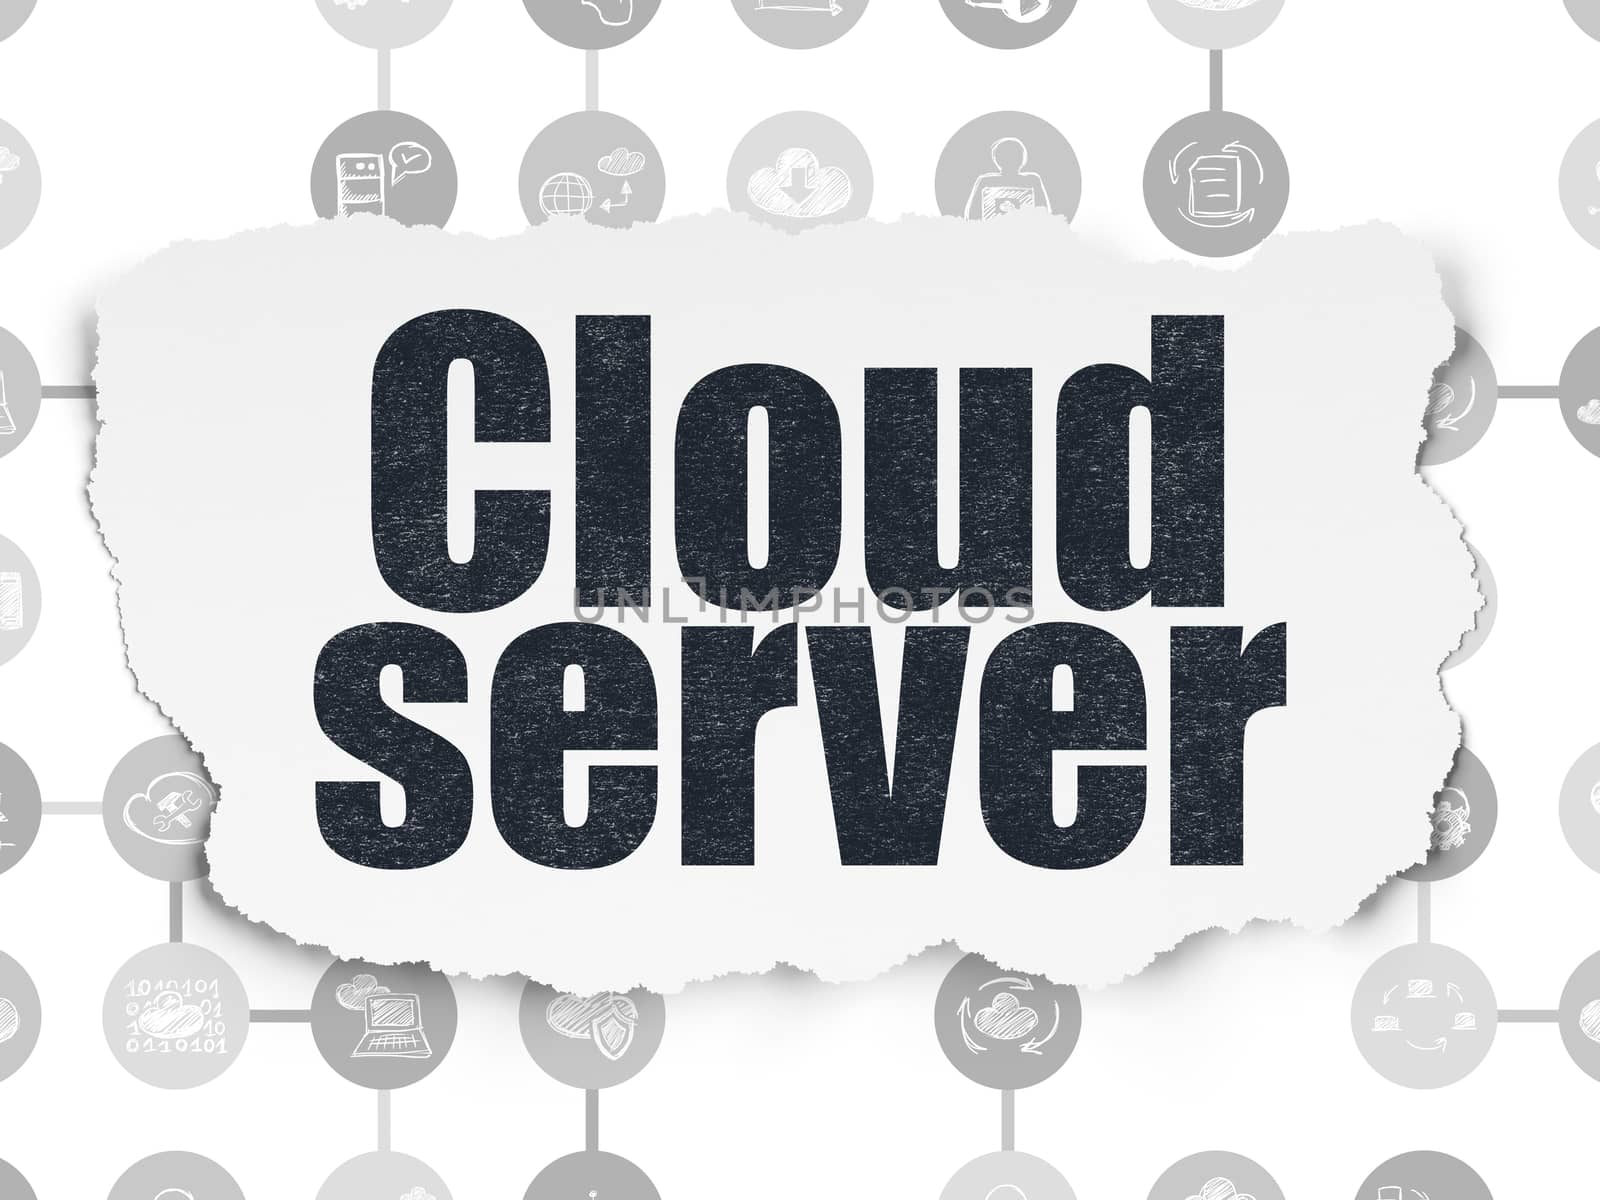 Cloud networking concept: Painted black text Cloud Server on Torn Paper background with Scheme Of Hand Drawn Cloud Technology Icons